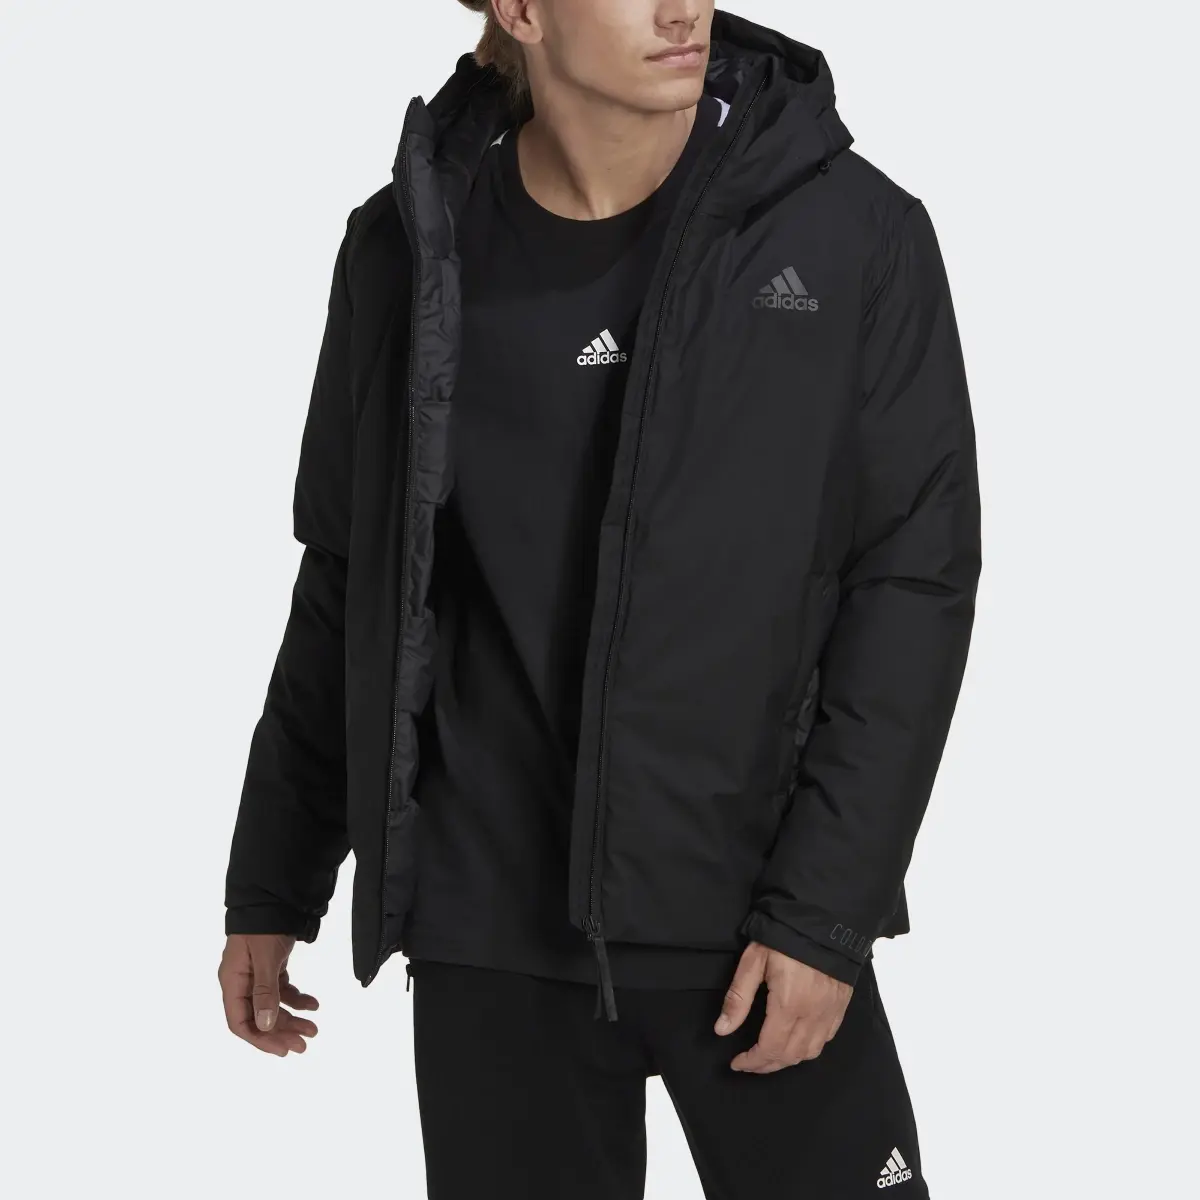 Adidas Traveer COLD.RDY Jacket. 1